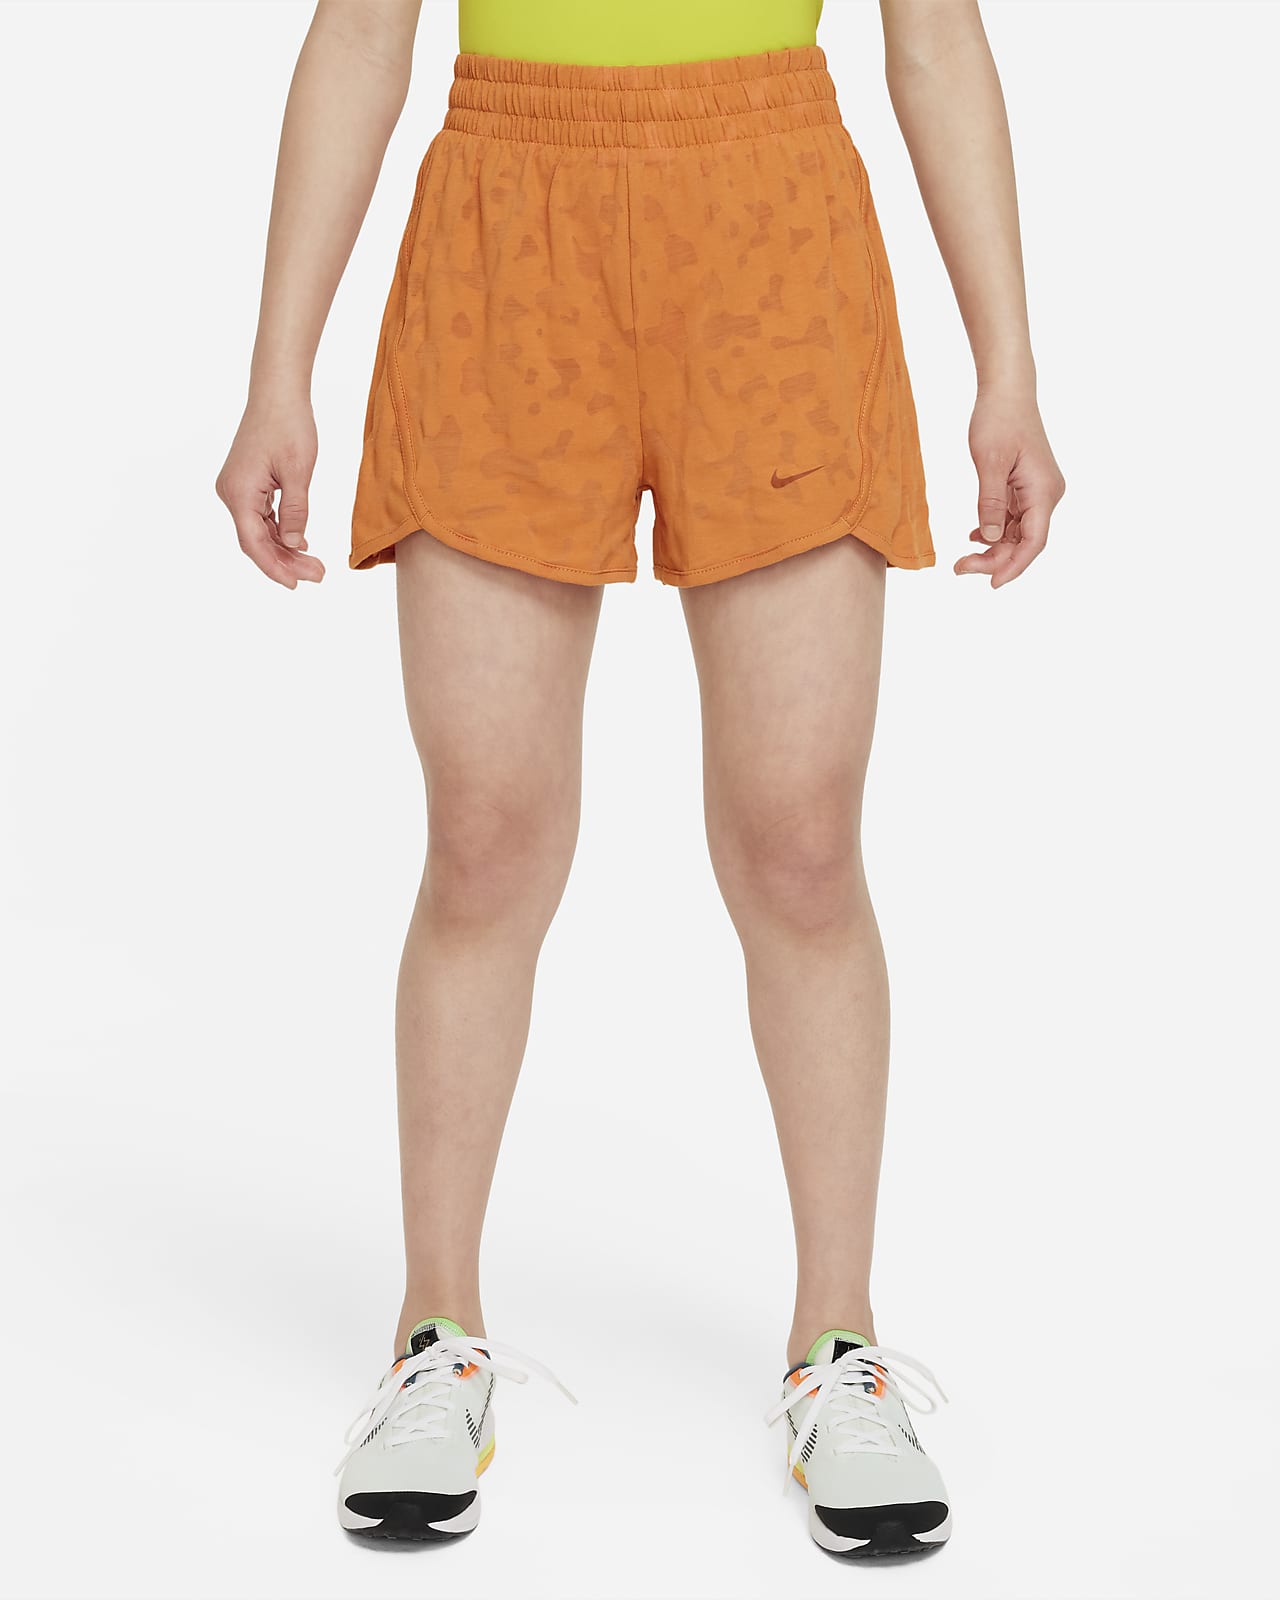 High Five 345583  Girls Knock Out Shorts